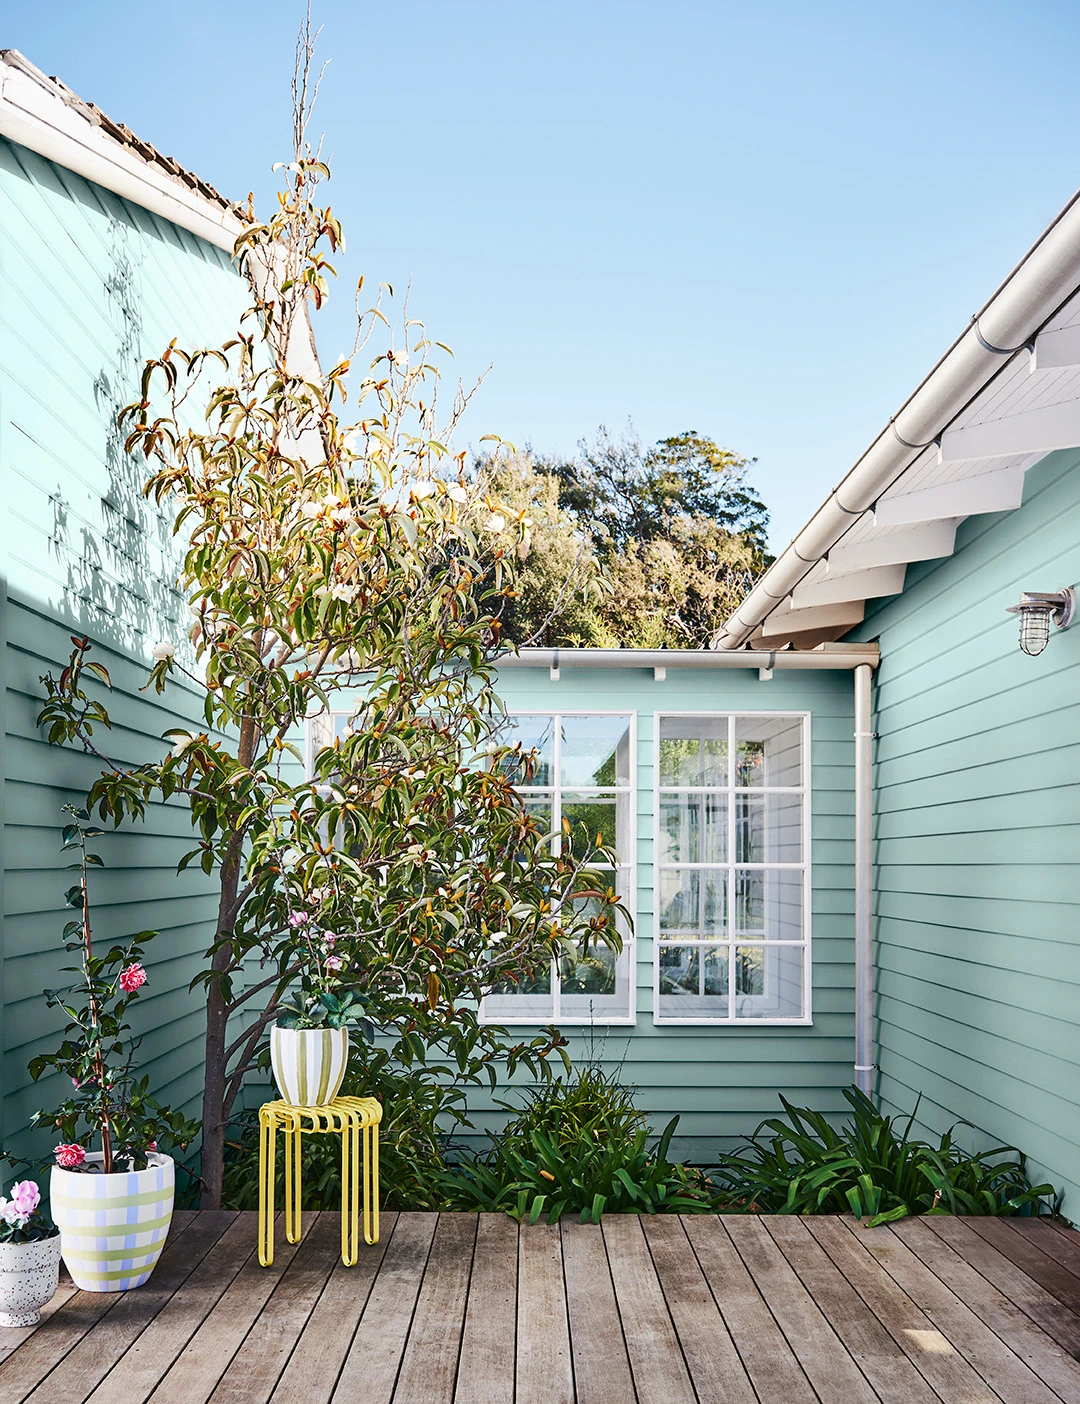 Exterior entertaining and garden area with decking and Harmonious coloured weatherboard walls.